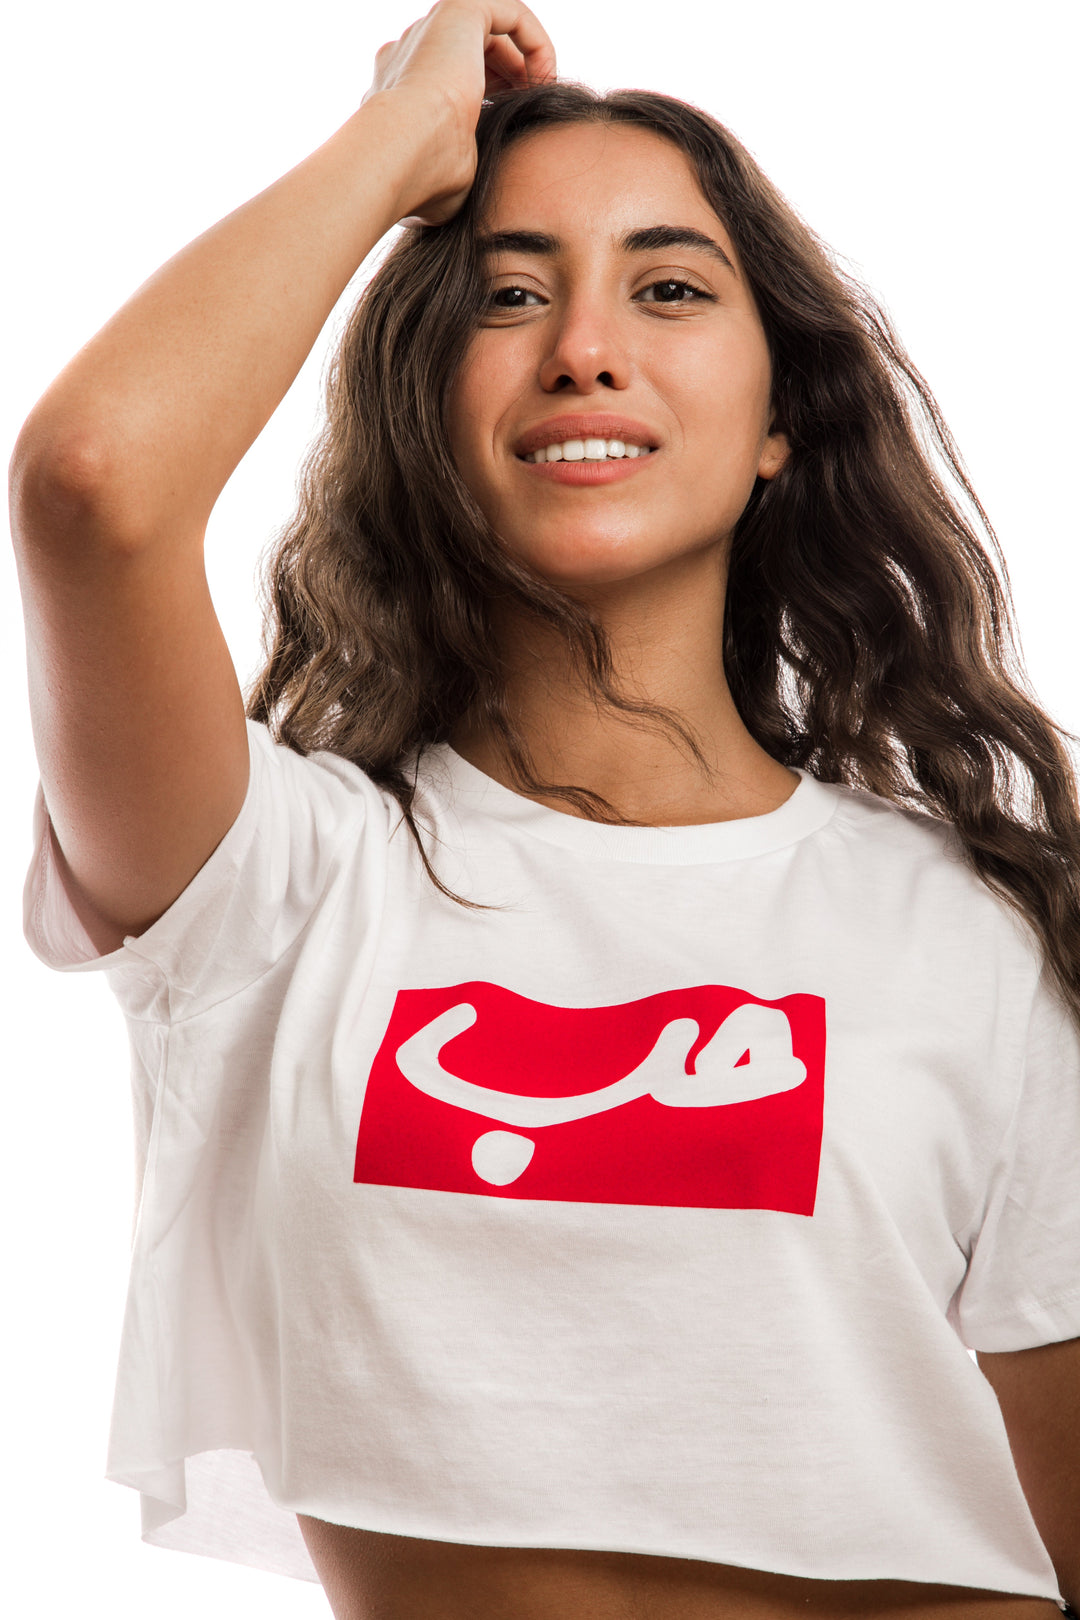 young adult female wearing white crop top with hobb written in arabic حب in white and in a red frame in the center of the crop top